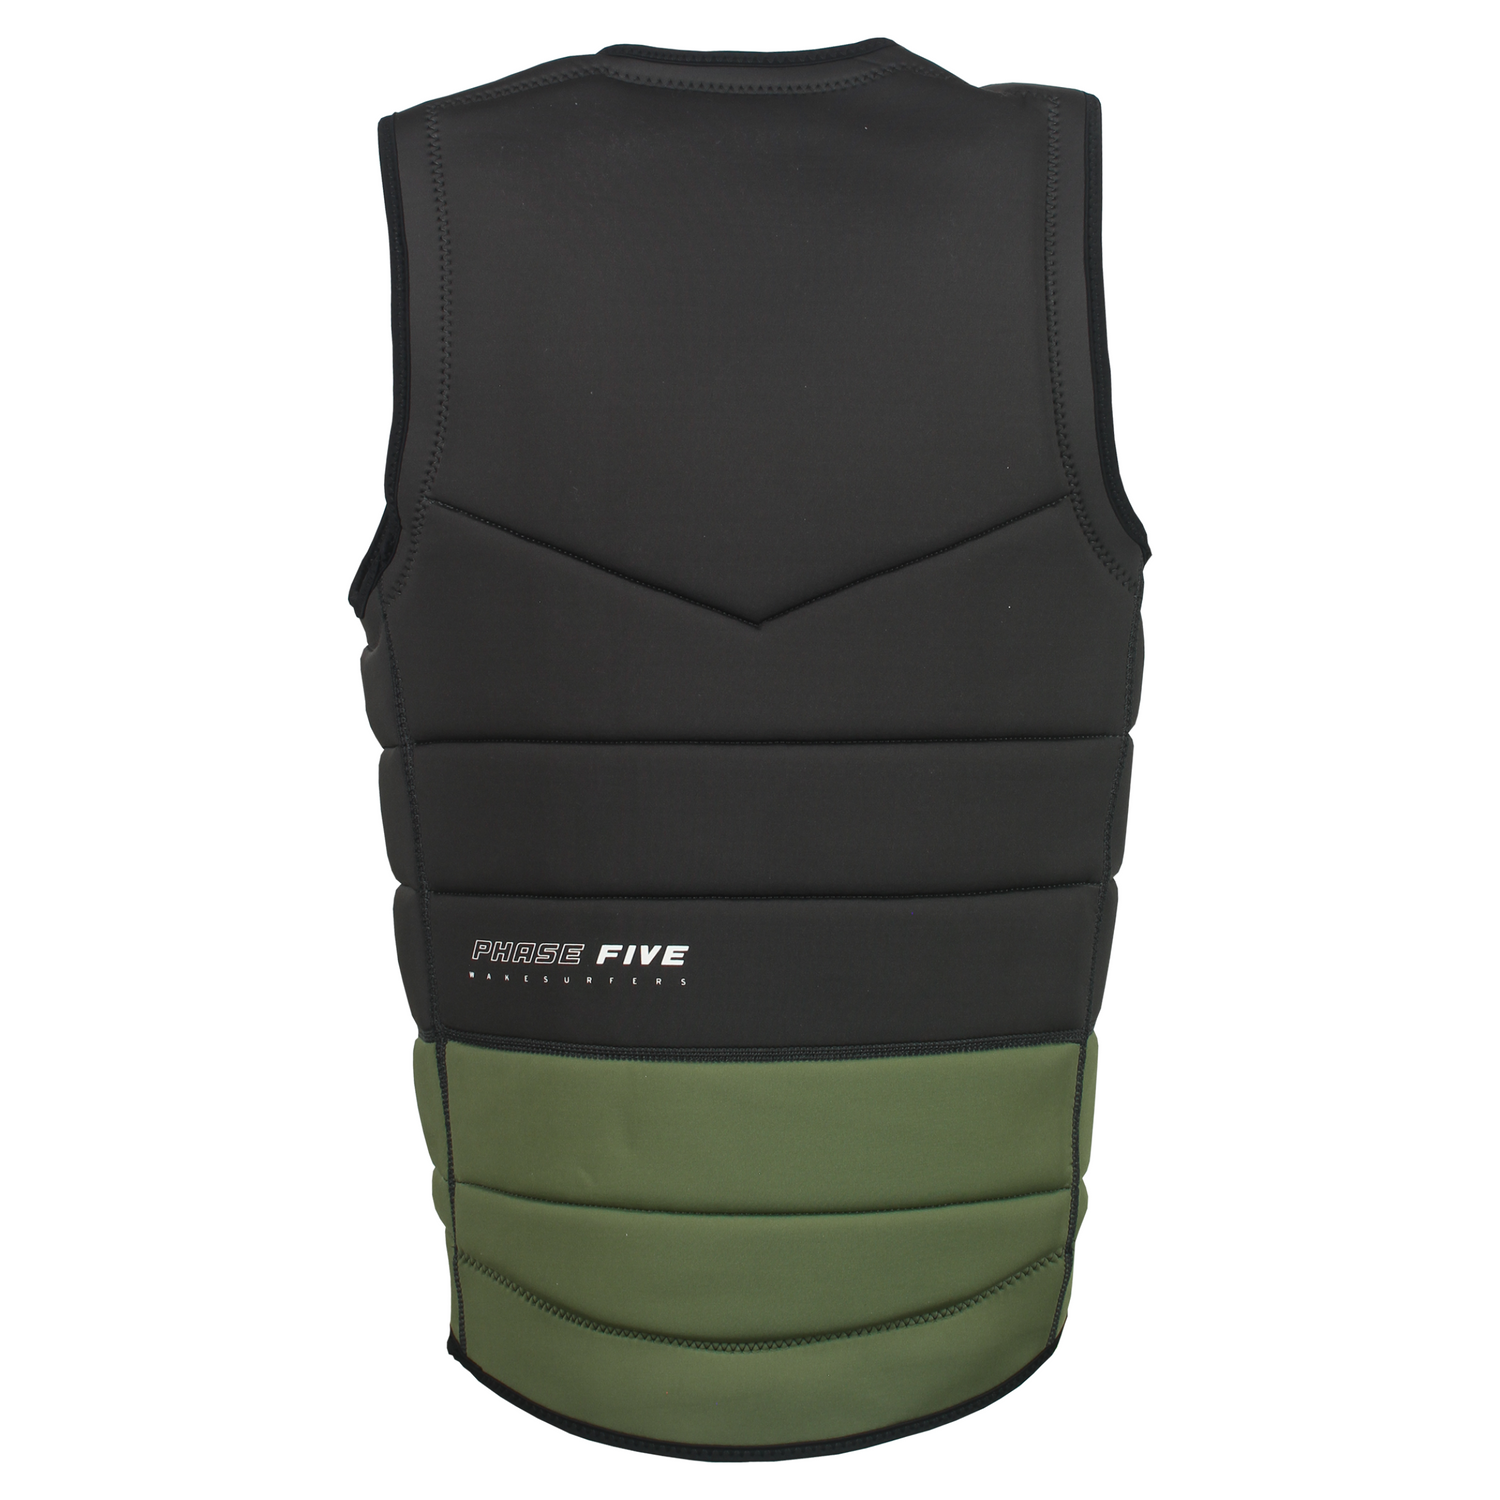 Phase 5 Men's Pro impact surf vest in black and green back side picture